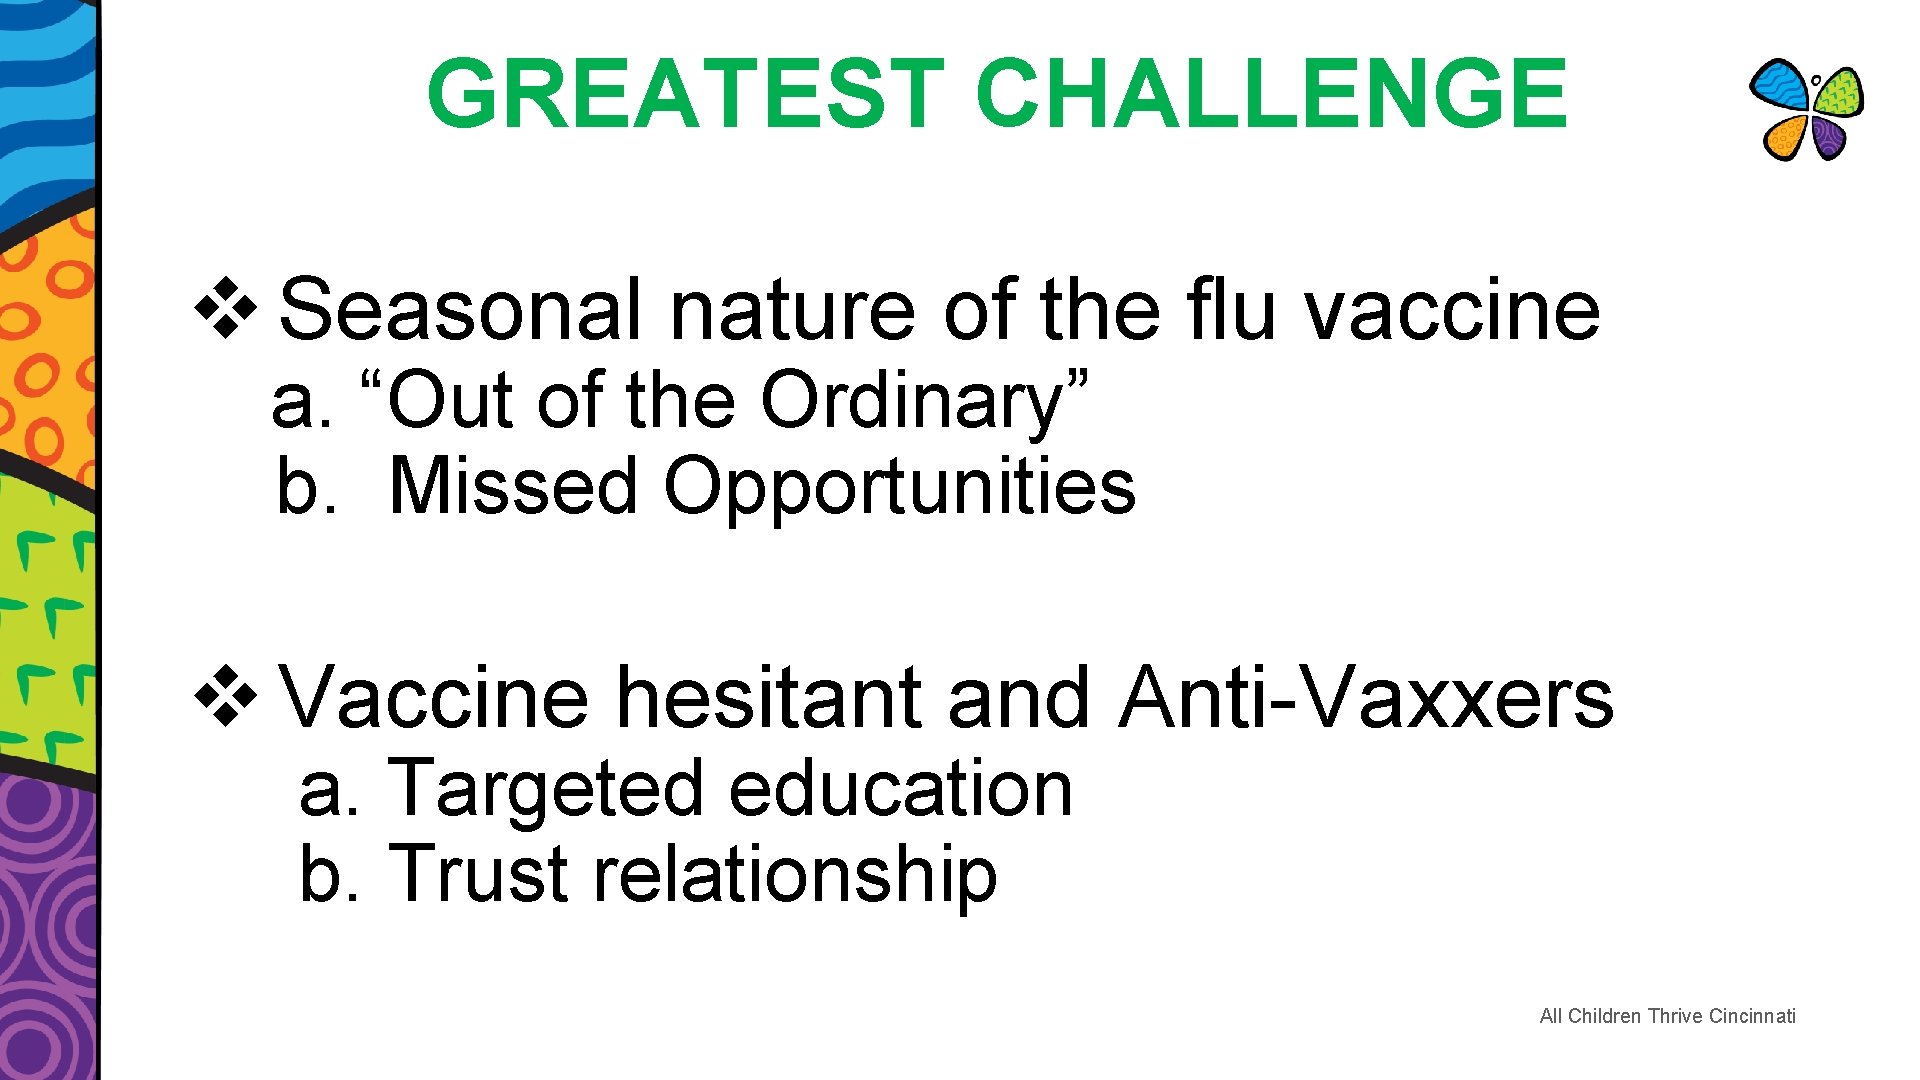 GREATEST CHALLENGE v Seasonal nature of the flu vaccine a. “Out of the Ordinary”